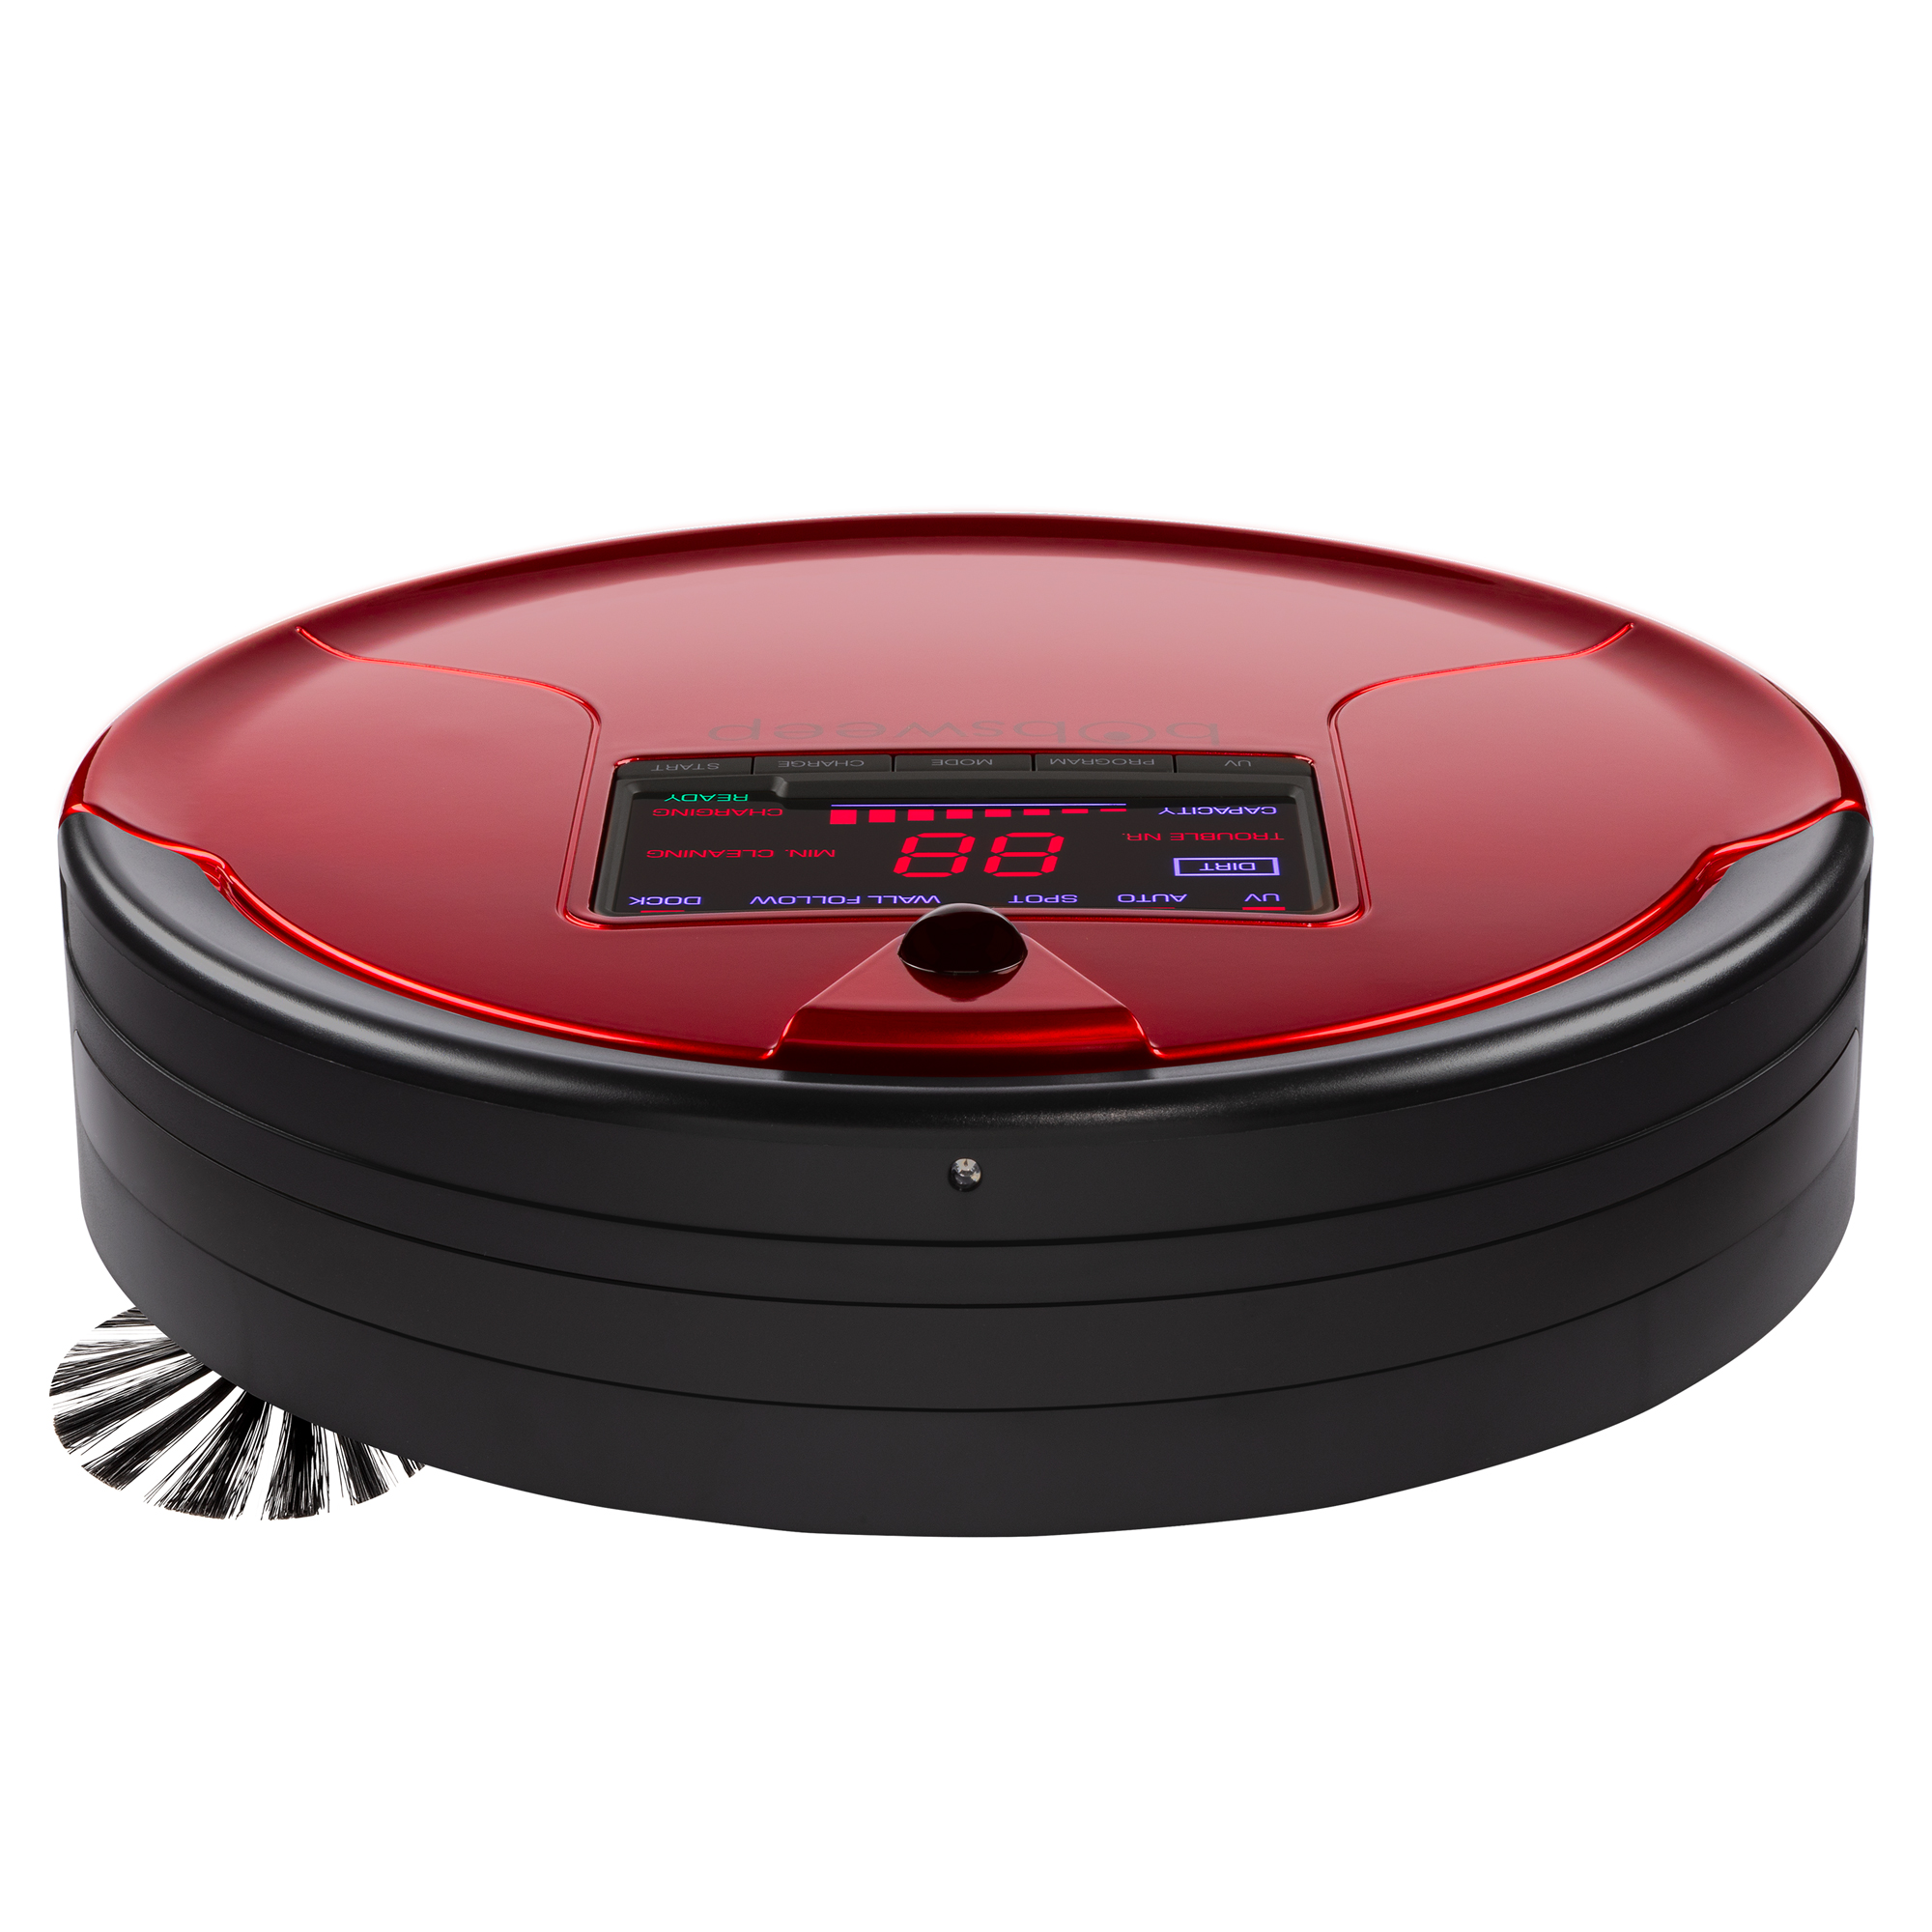 Bobsweep Pet Hair Robotic Vacuum Cleaner and Mop, Rouge - image 4 of 9